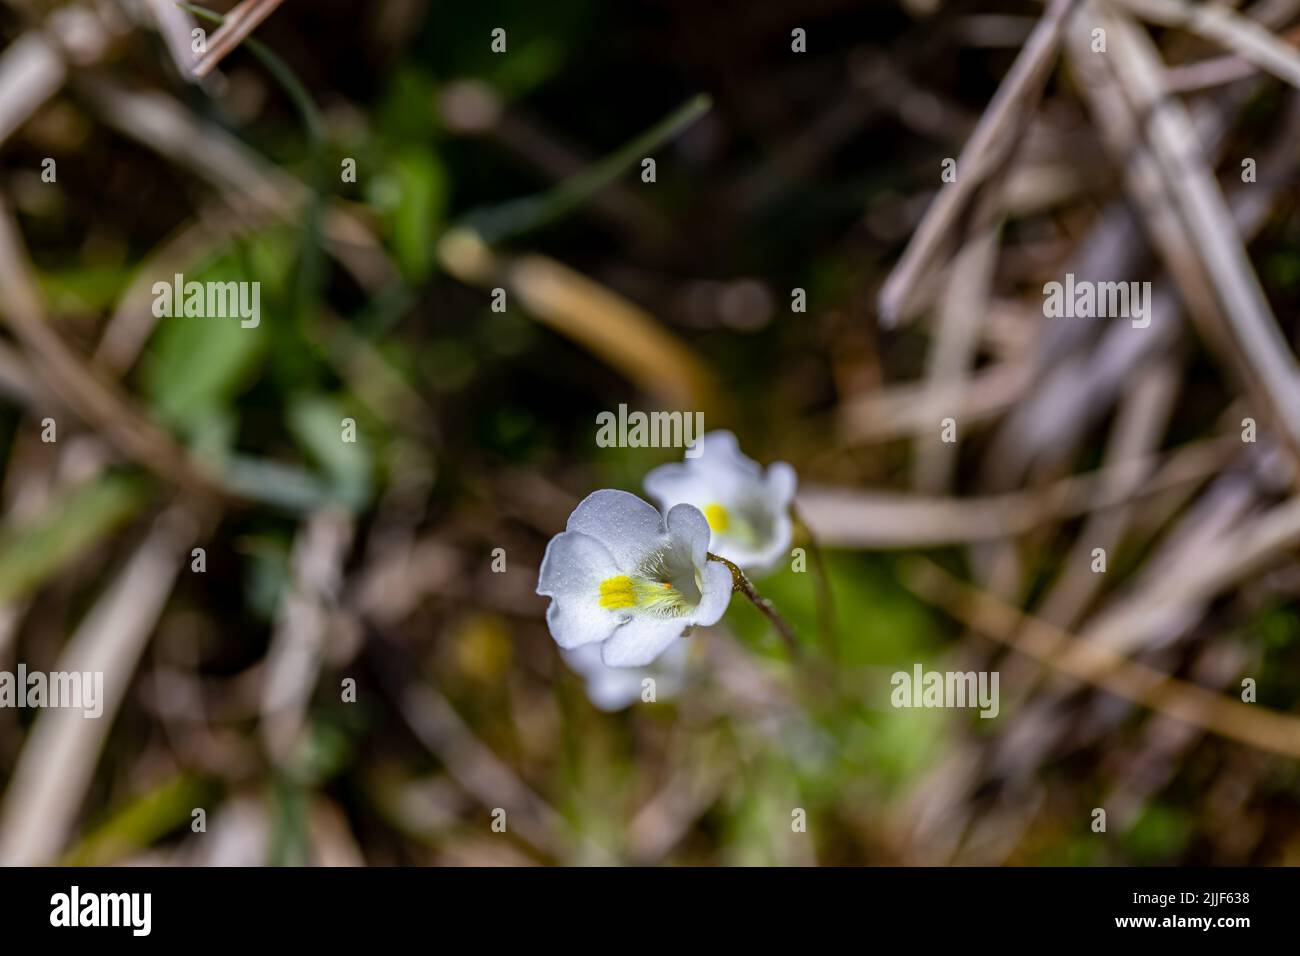 Pinguicula alpina flower growing in meadow, close up Stock Photo